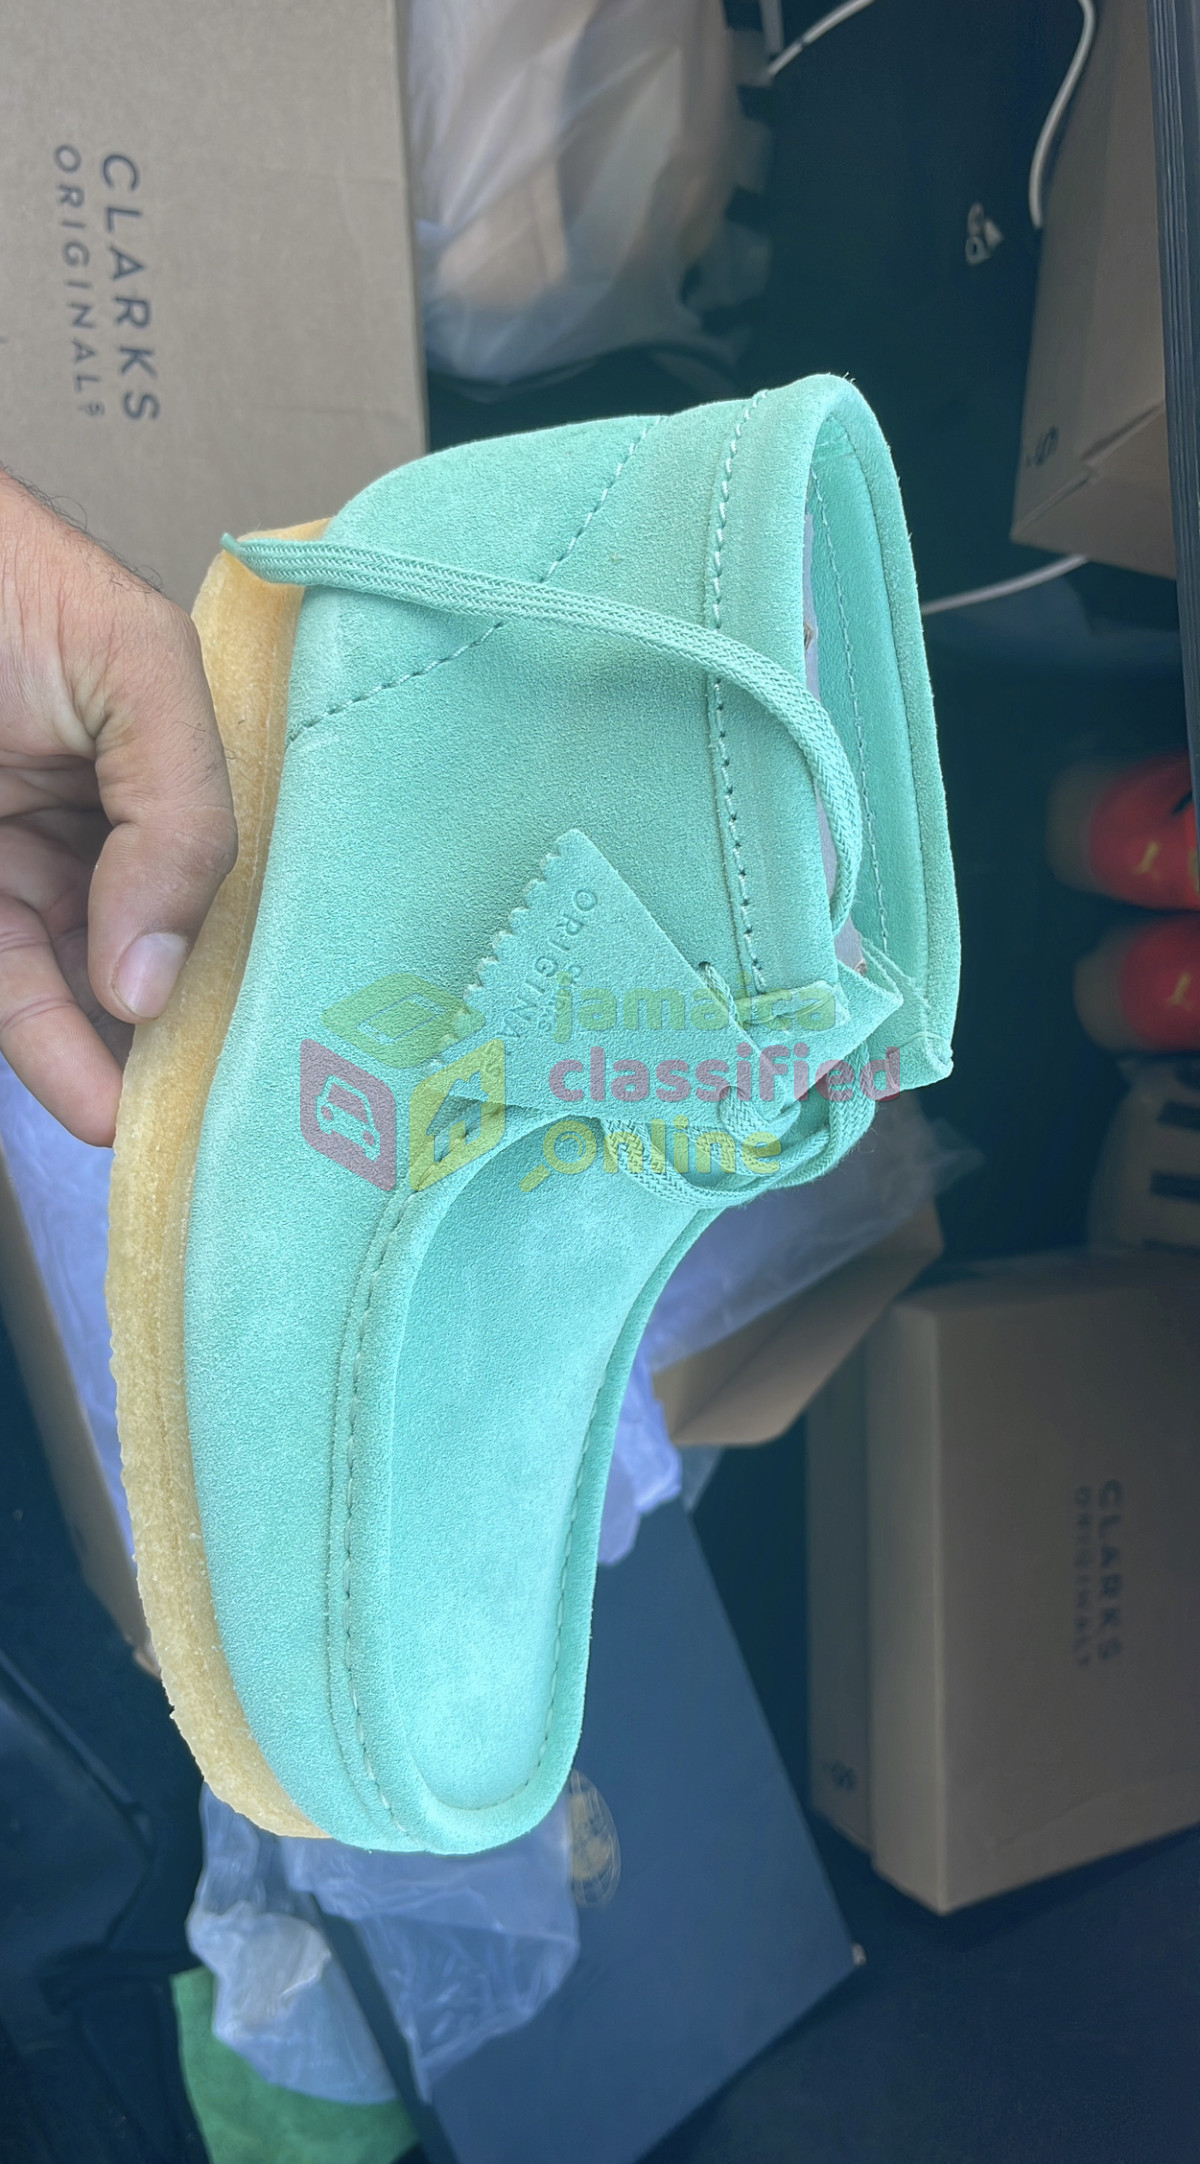 NEW CLARKS FOR SALE CHEAP in Kingston St Andrew - Shoes